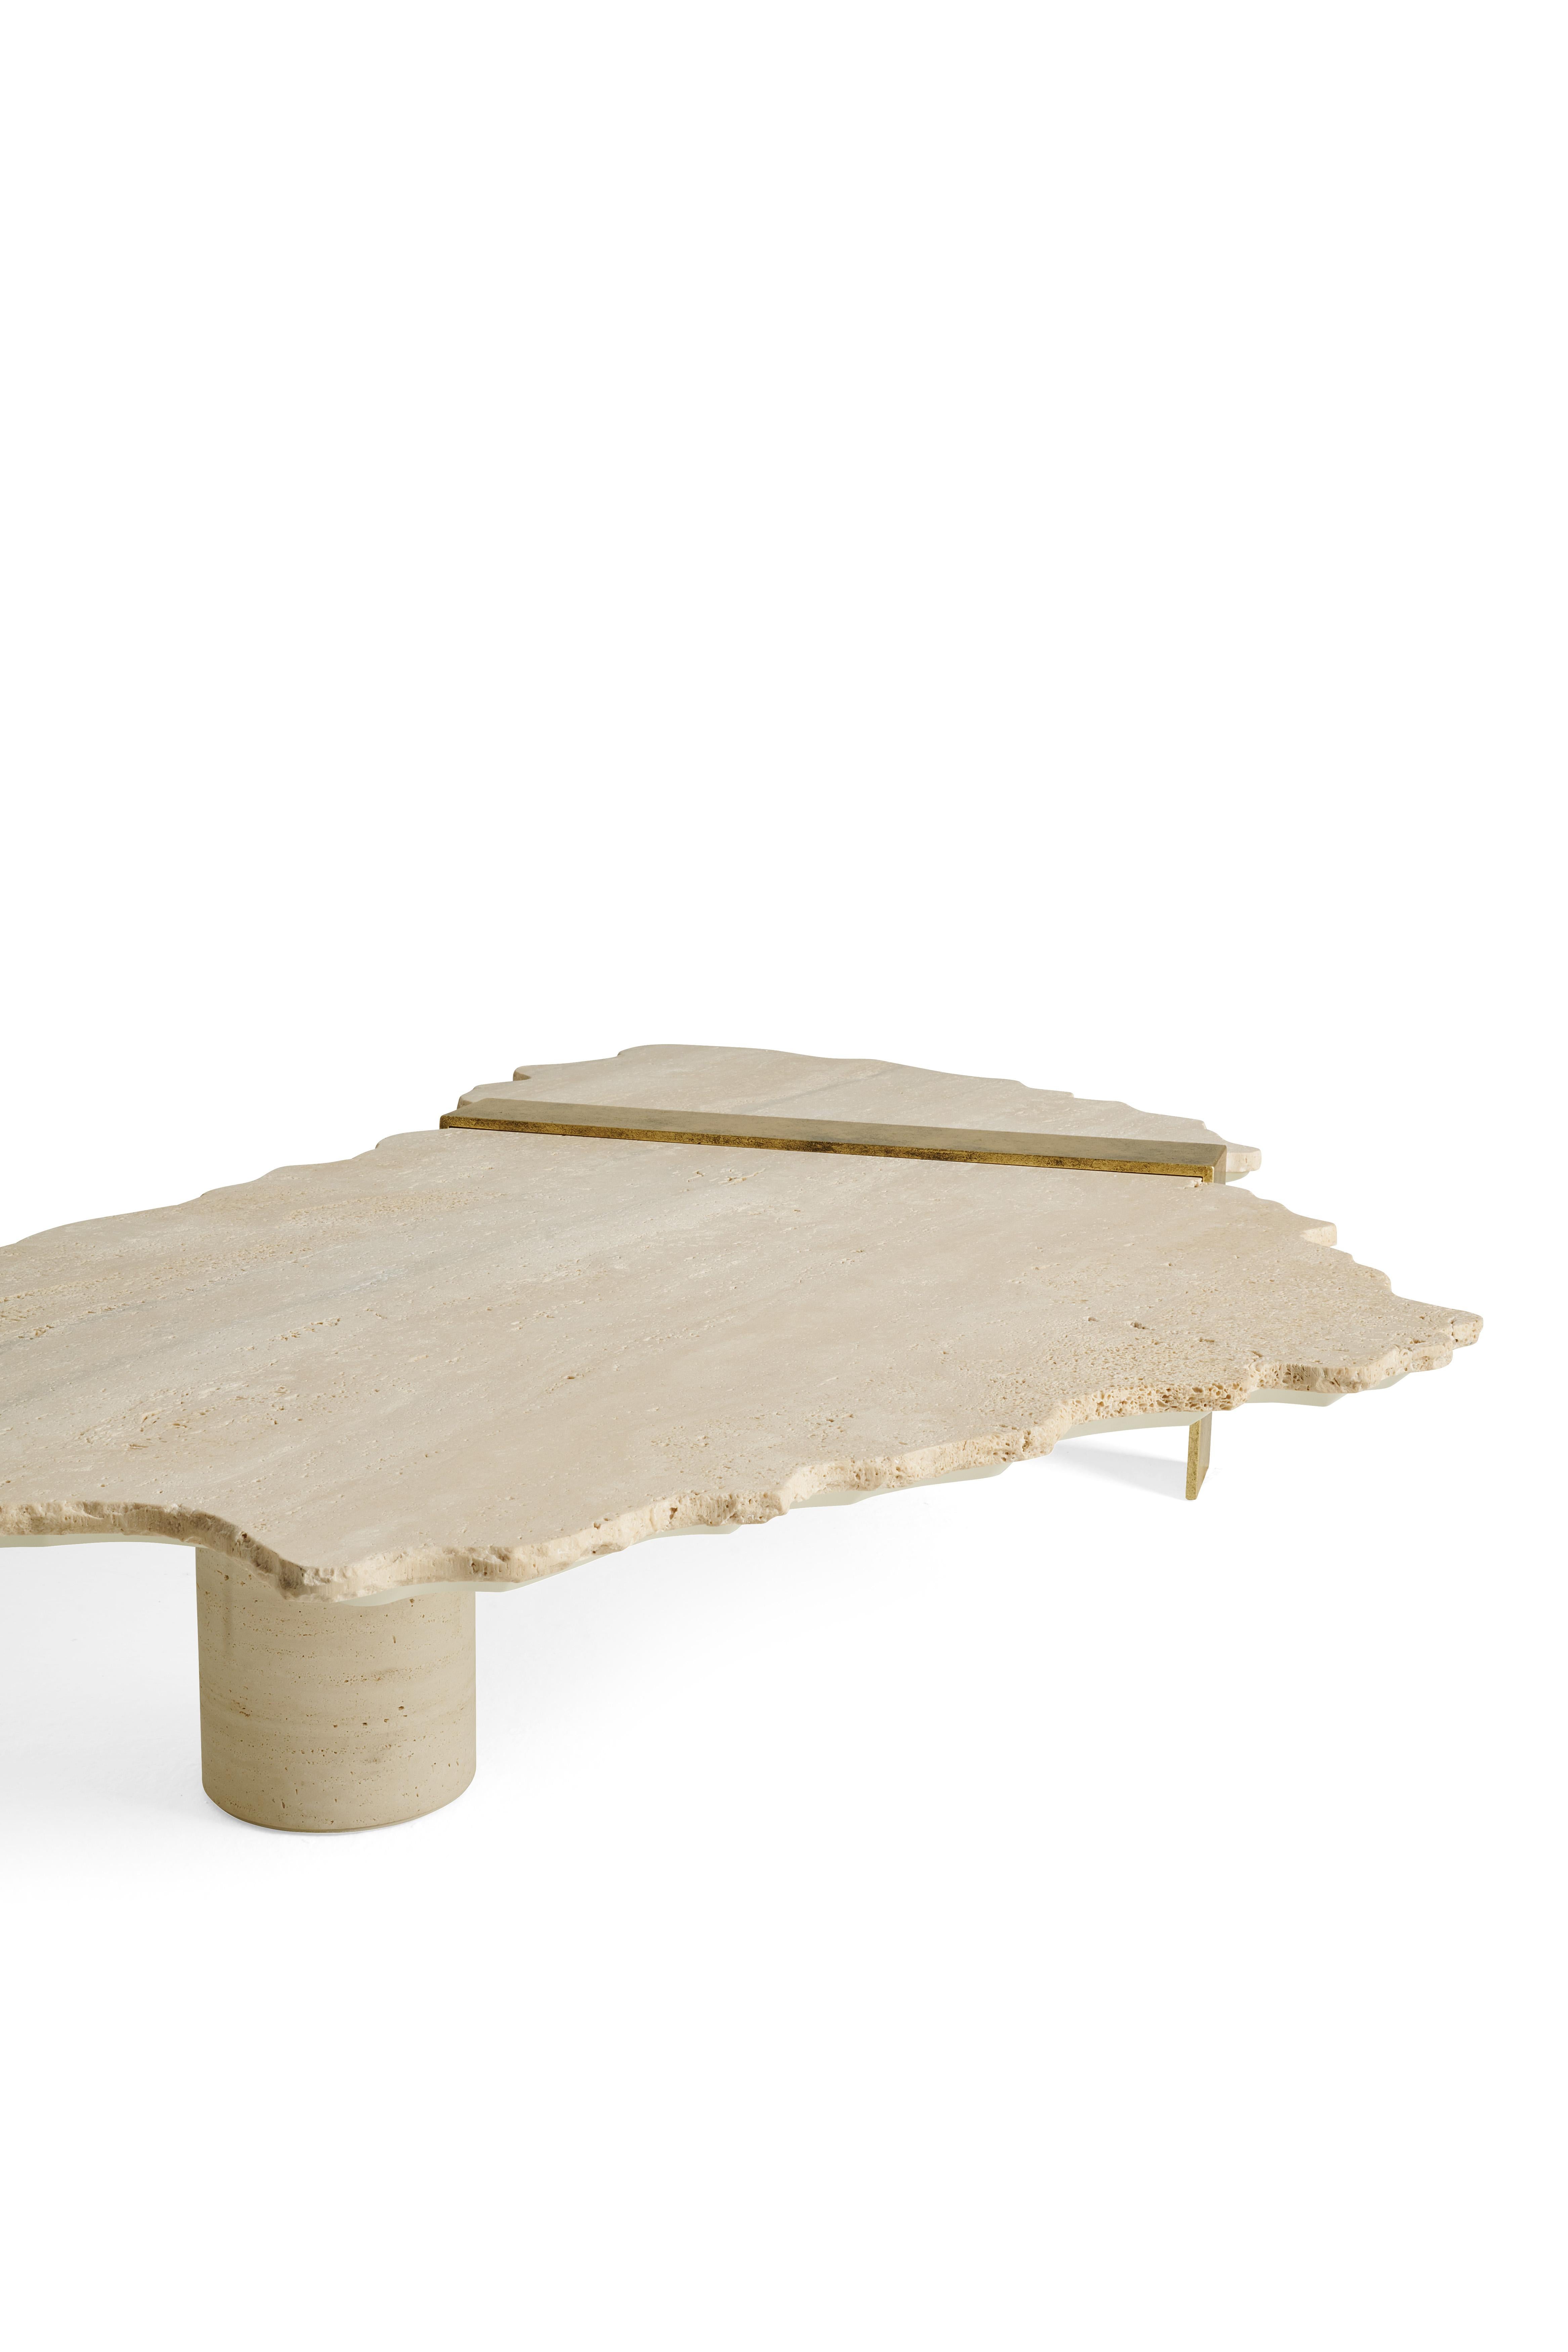 Contemporary Galite Central Table in Travertino Marble by Roberto Cavalli Home Interiors For Sale